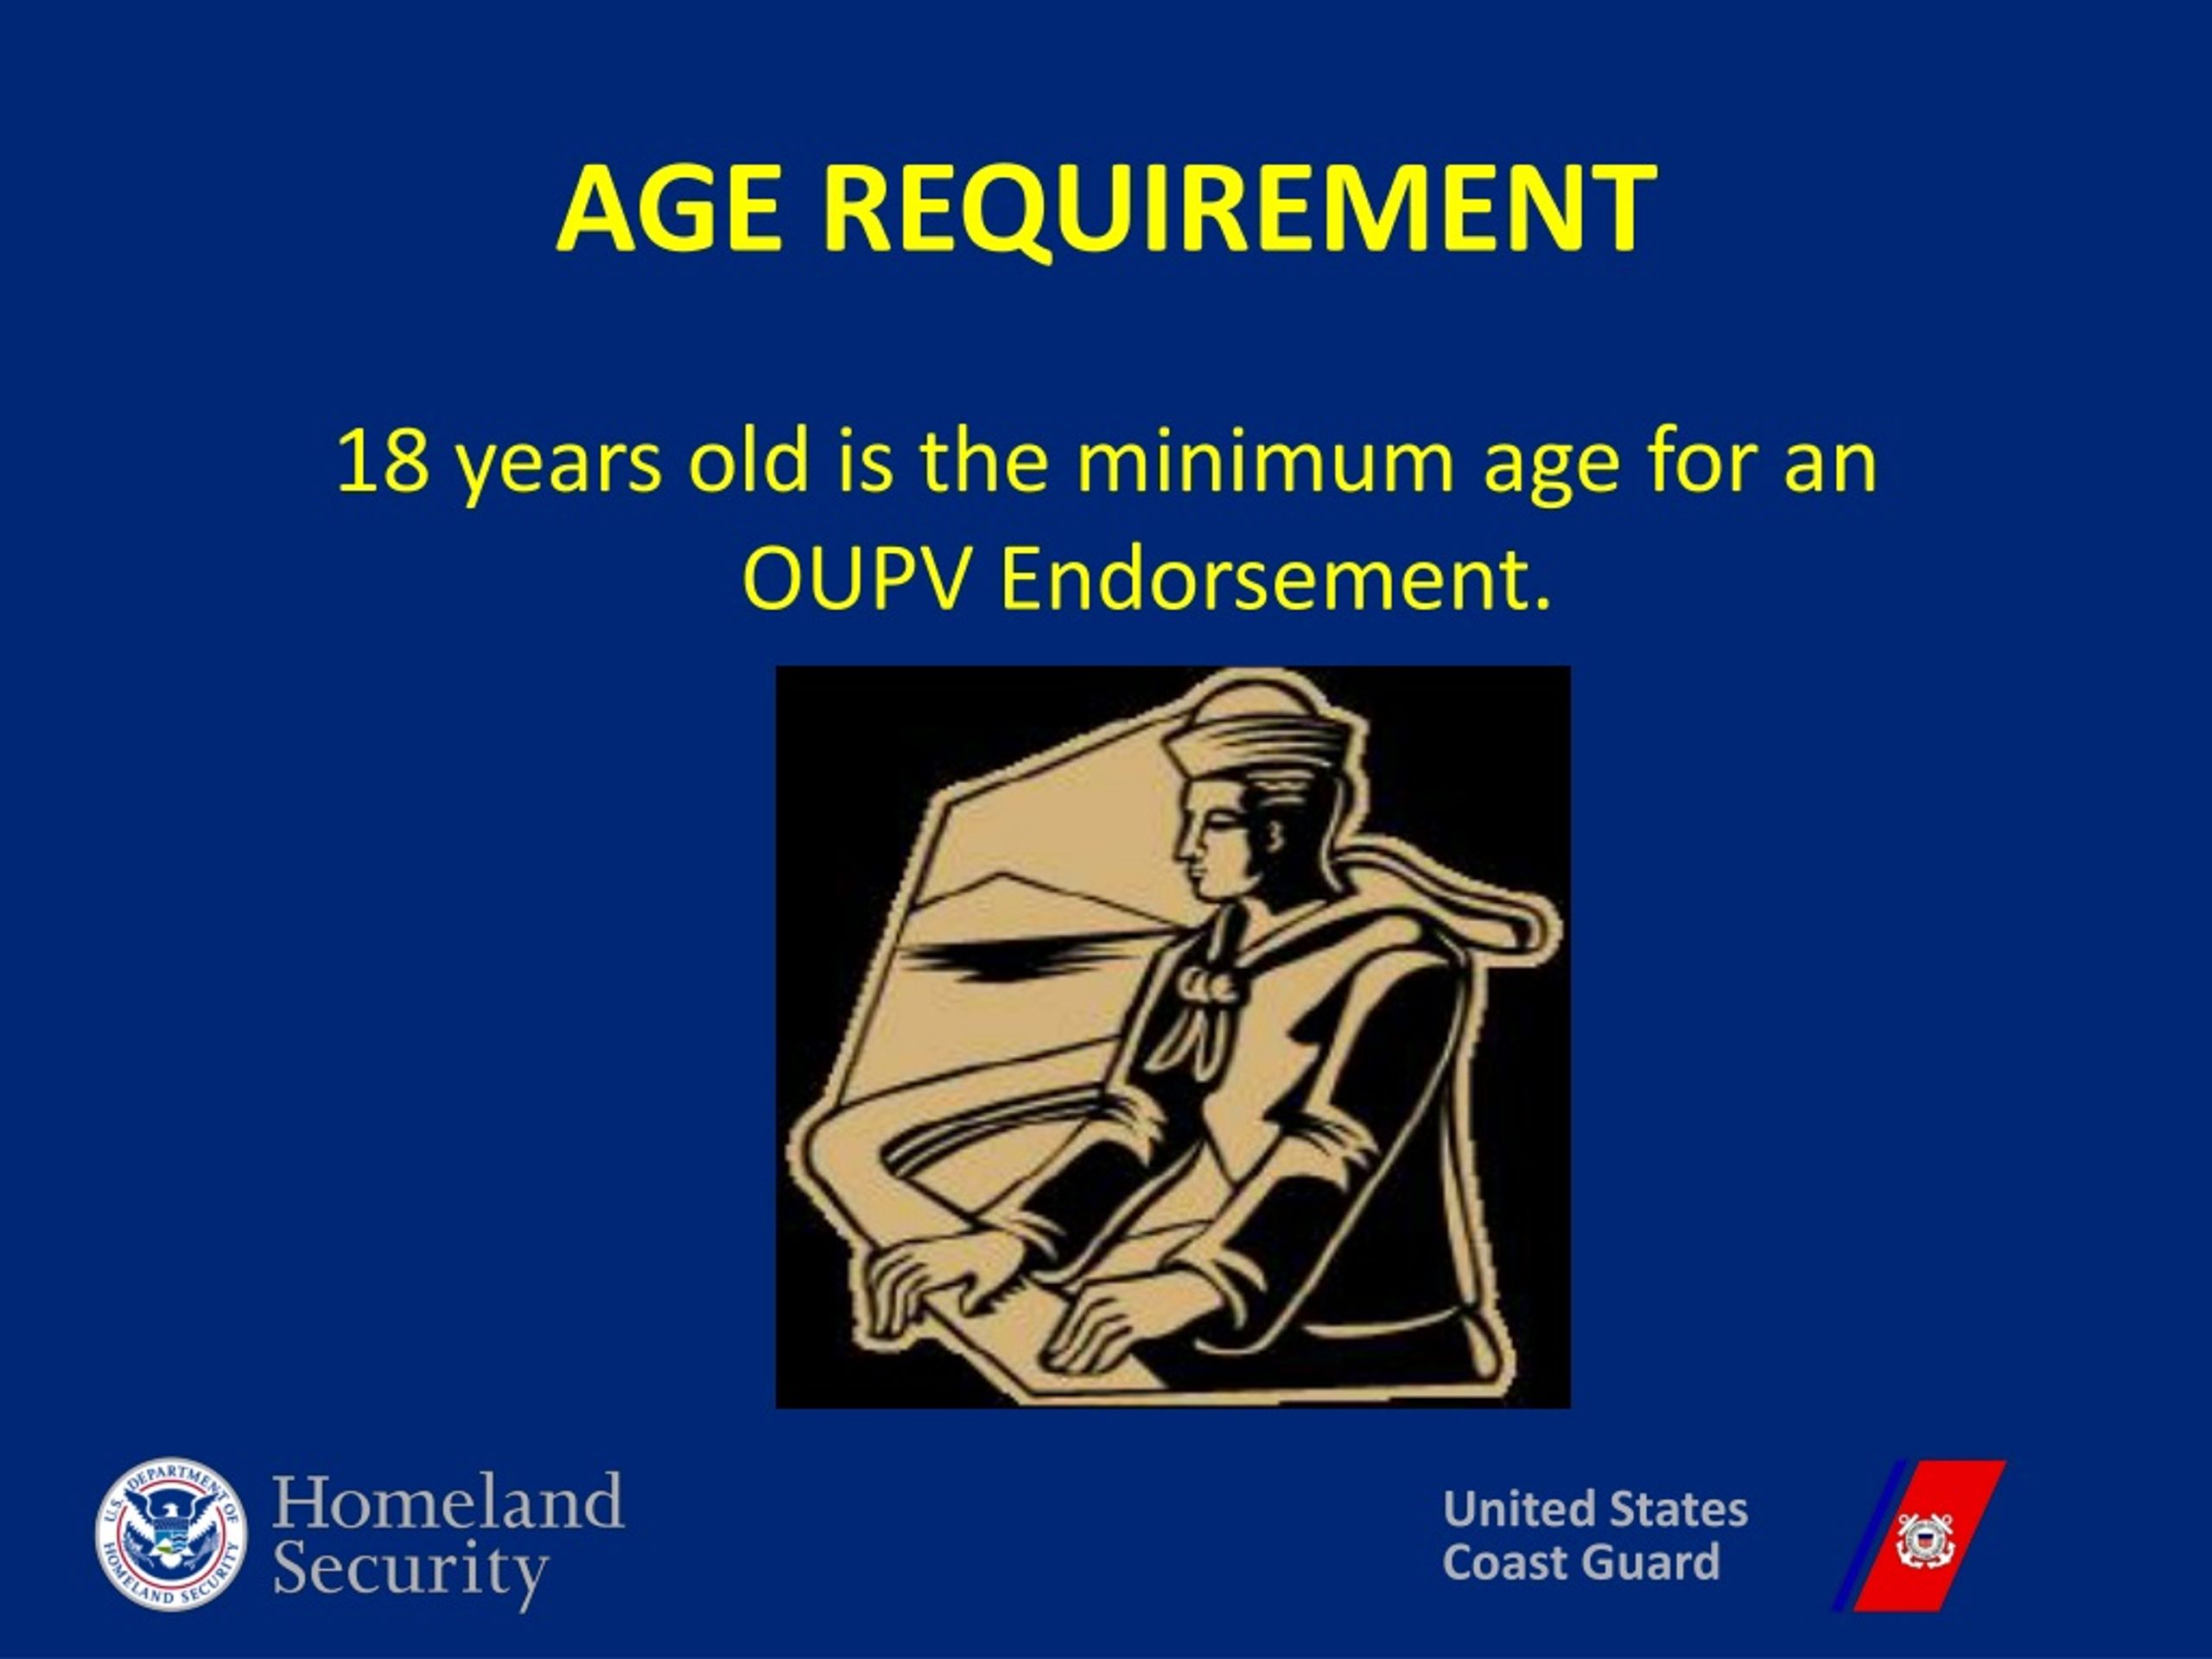 PPT Getting a Coast Guard Credential OUPV ENDORSEMENT PowerPoint